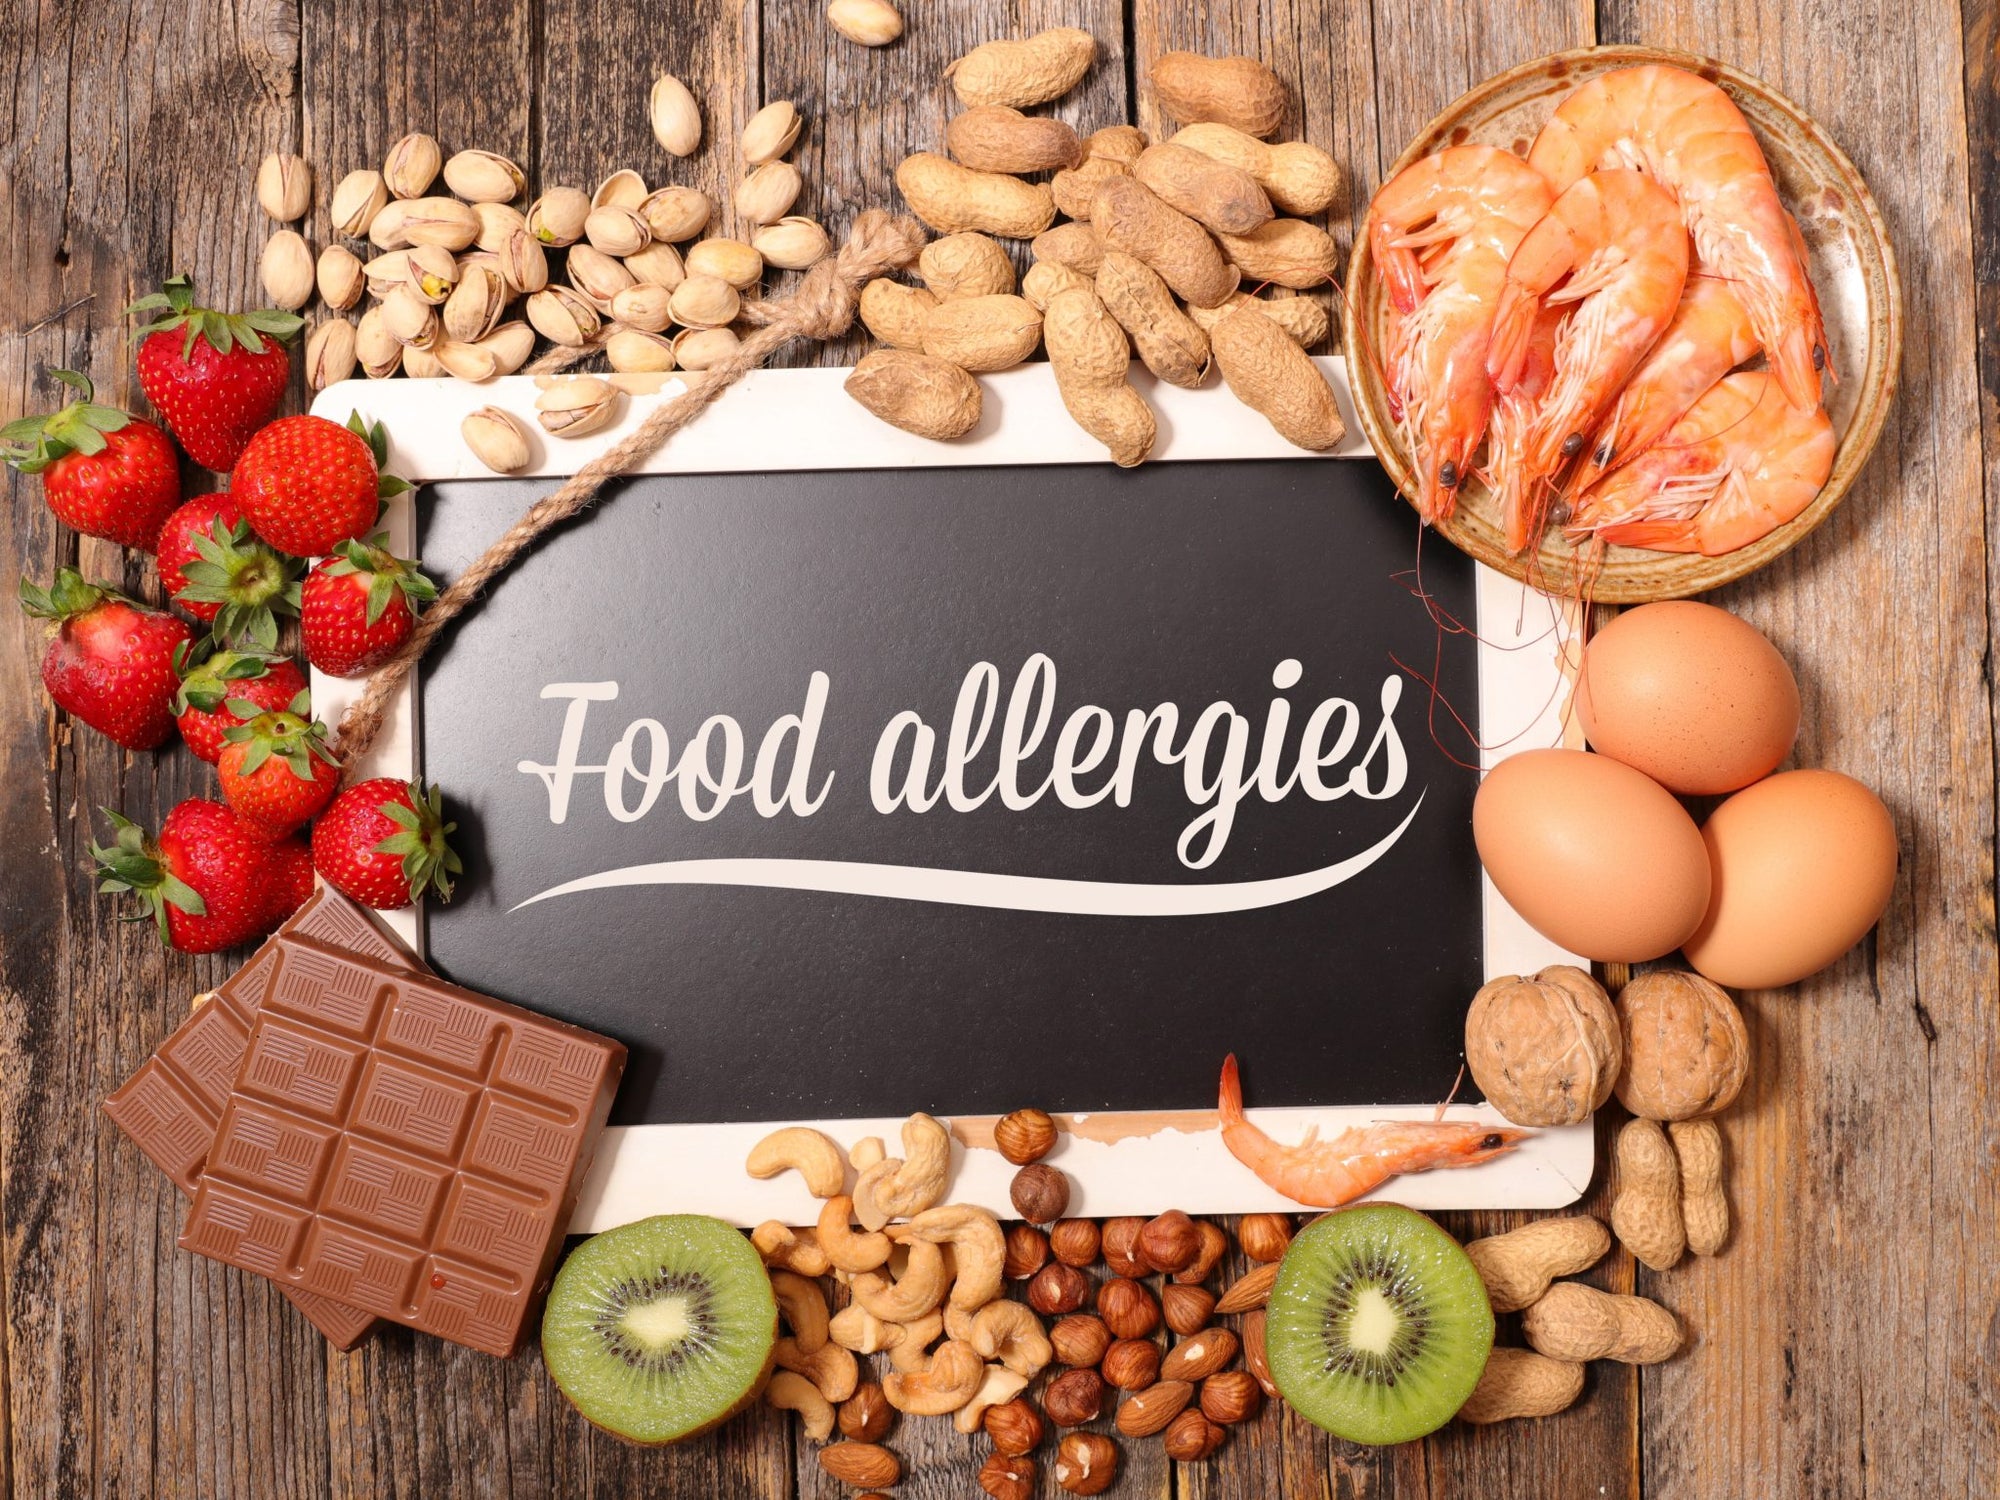 What’s the difference with an allergy and a food intolerance?